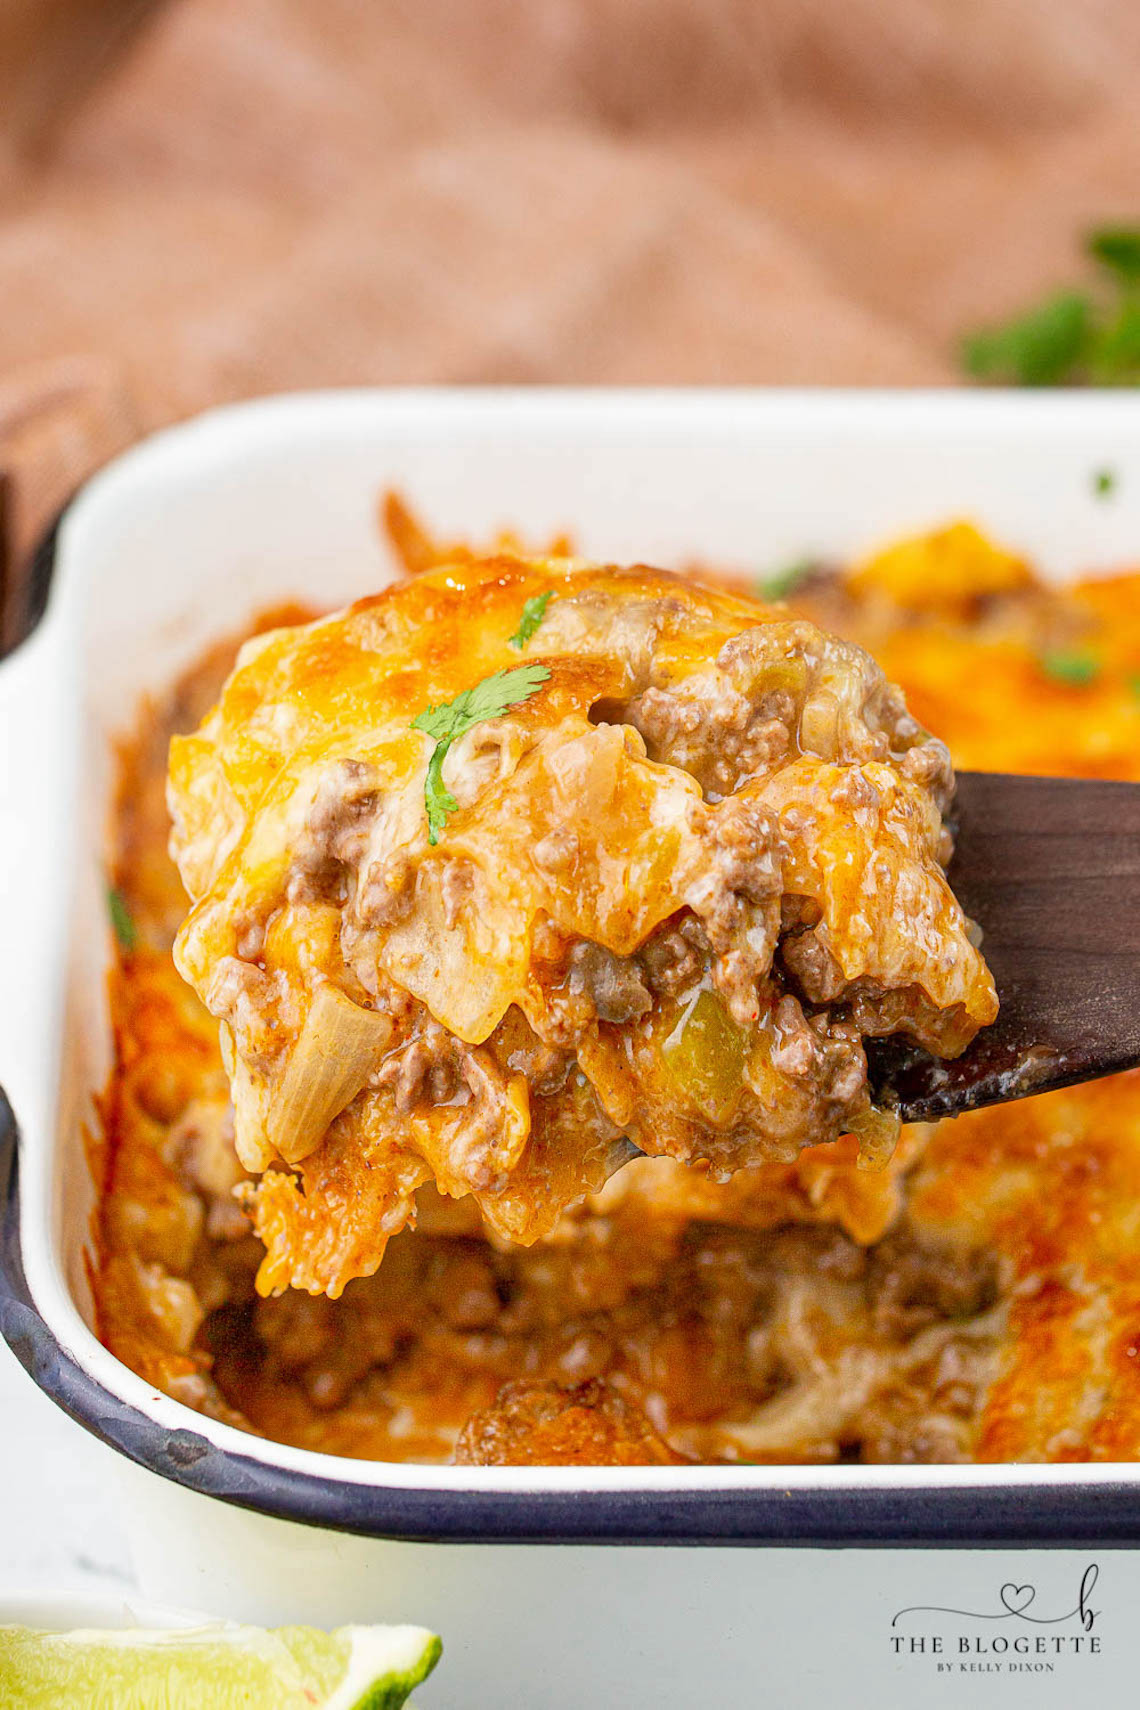 Our Taco Casserole has everything you love about delicious tacos layered into one irresistible dish! It's the ultimate easy comfort food for busy families.